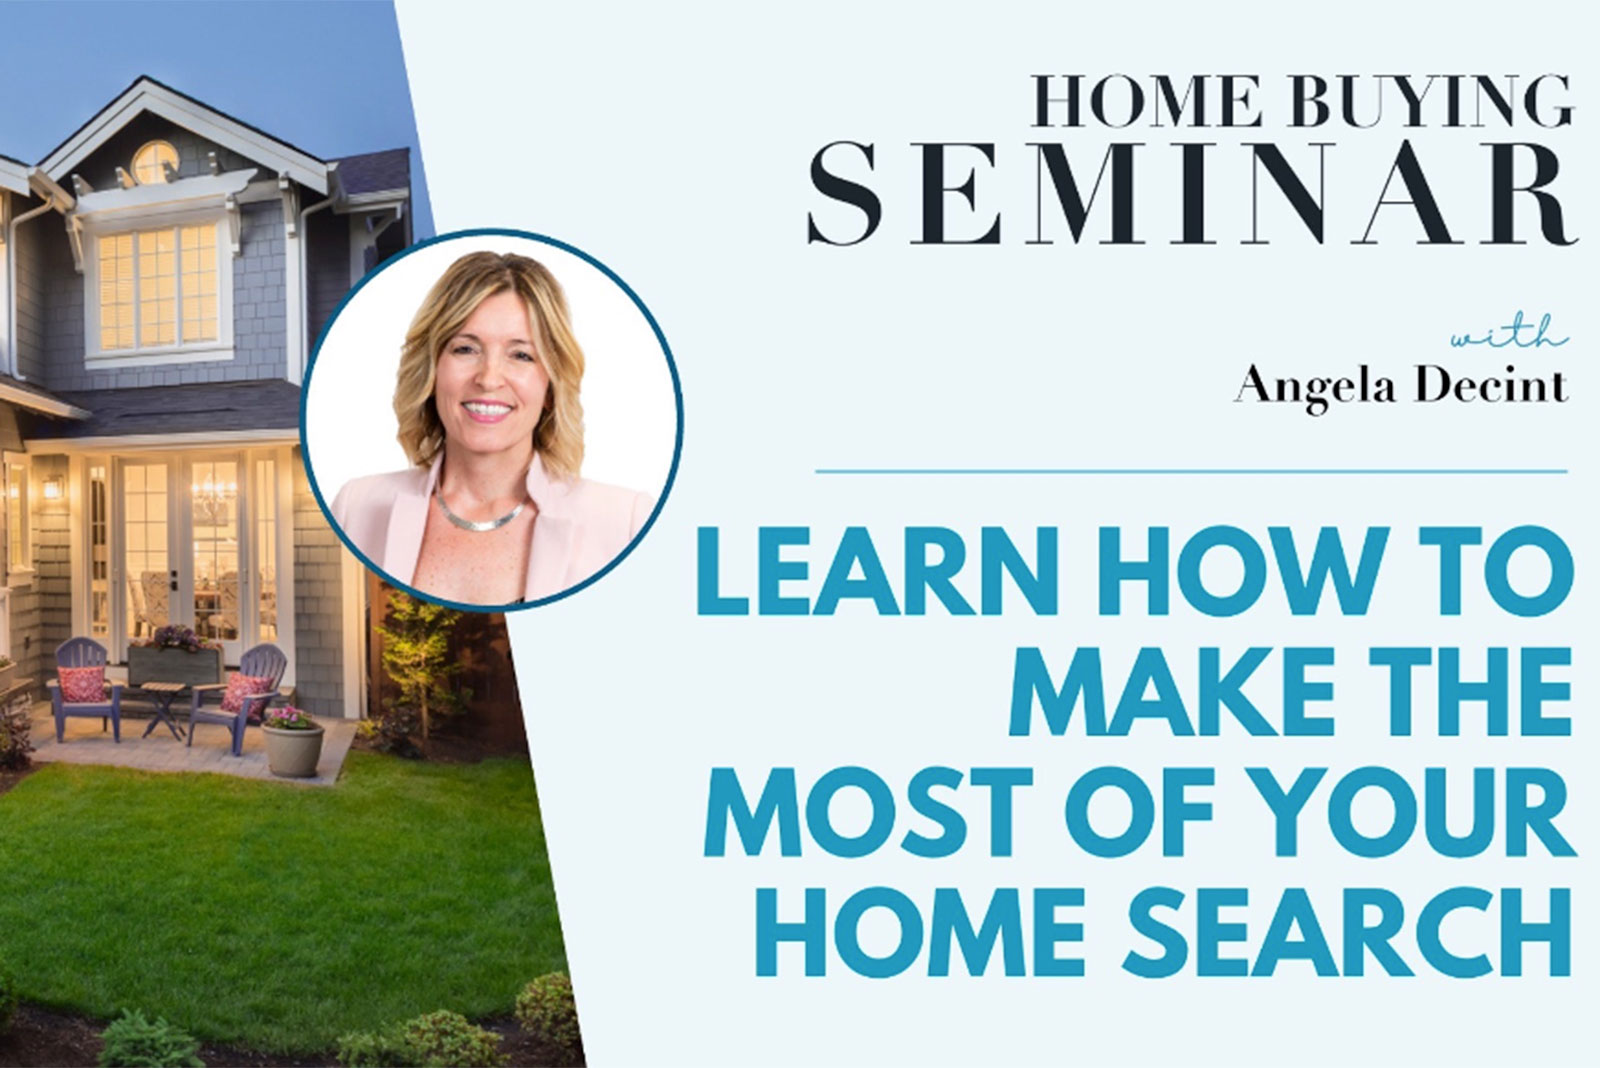 Home buying seminar: Make the most of your home search